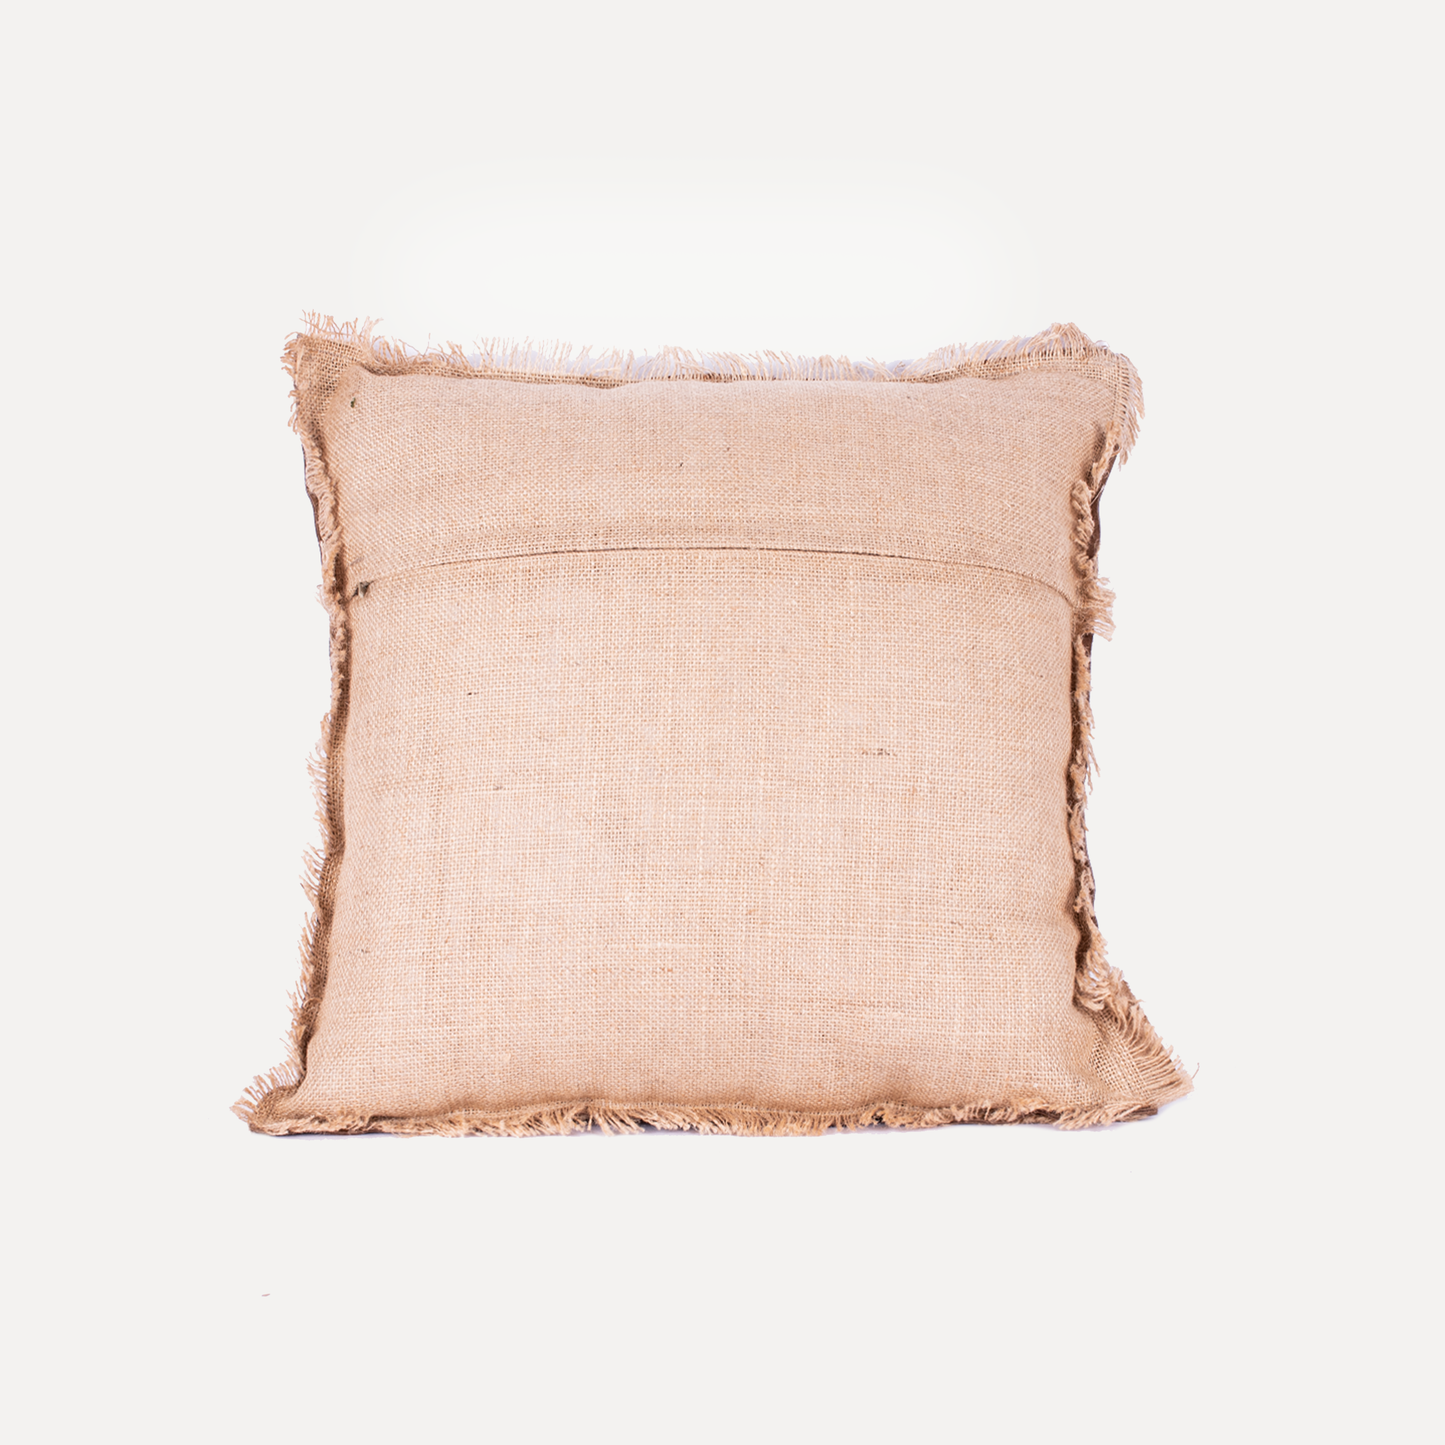 Chama - cushion with jute and leather patchwork